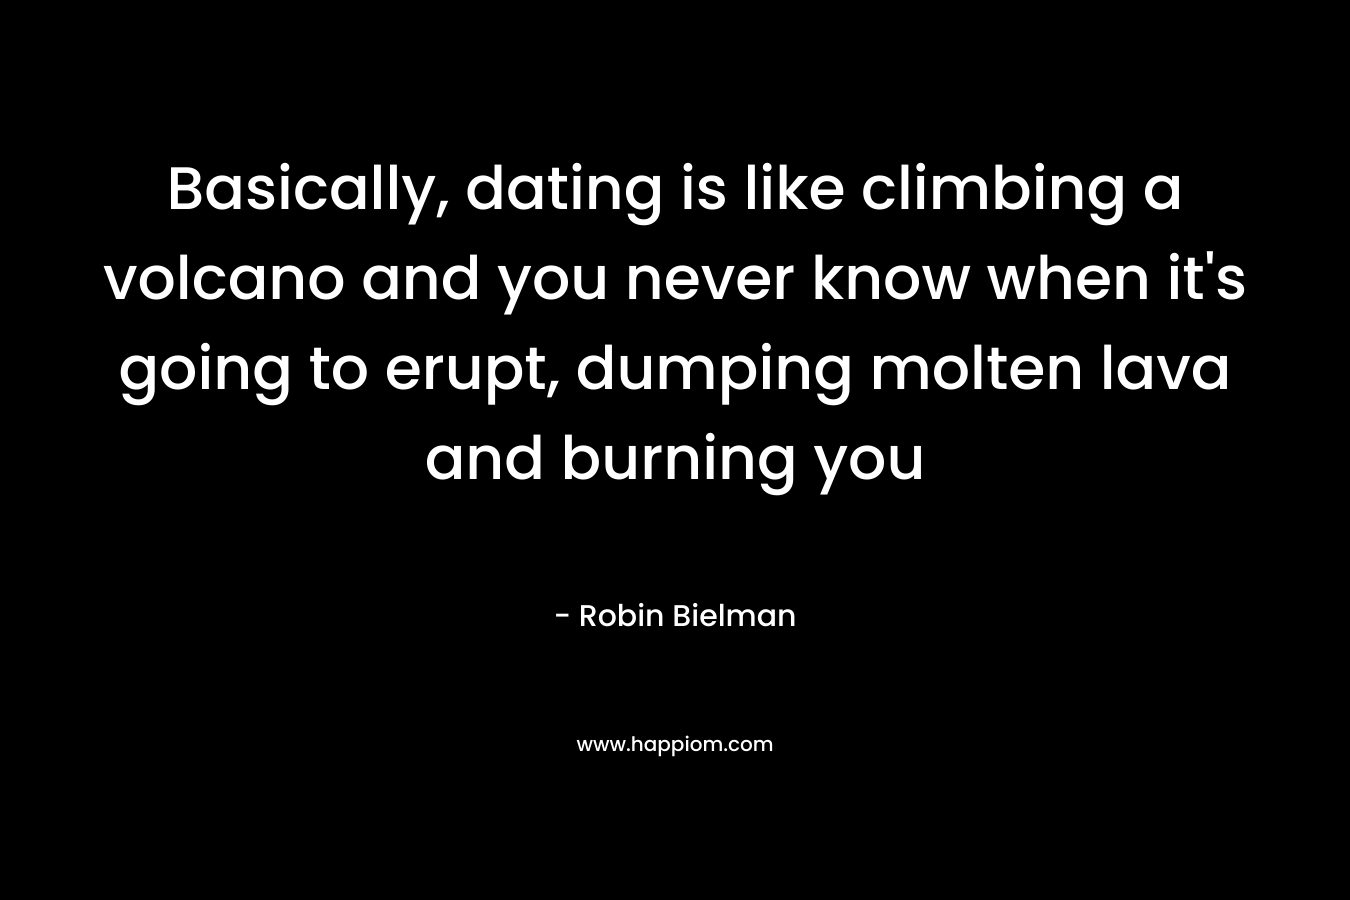 Basically, dating is like climbing a volcano and you never know when it’s going to erupt, dumping molten lava and burning you – Robin Bielman